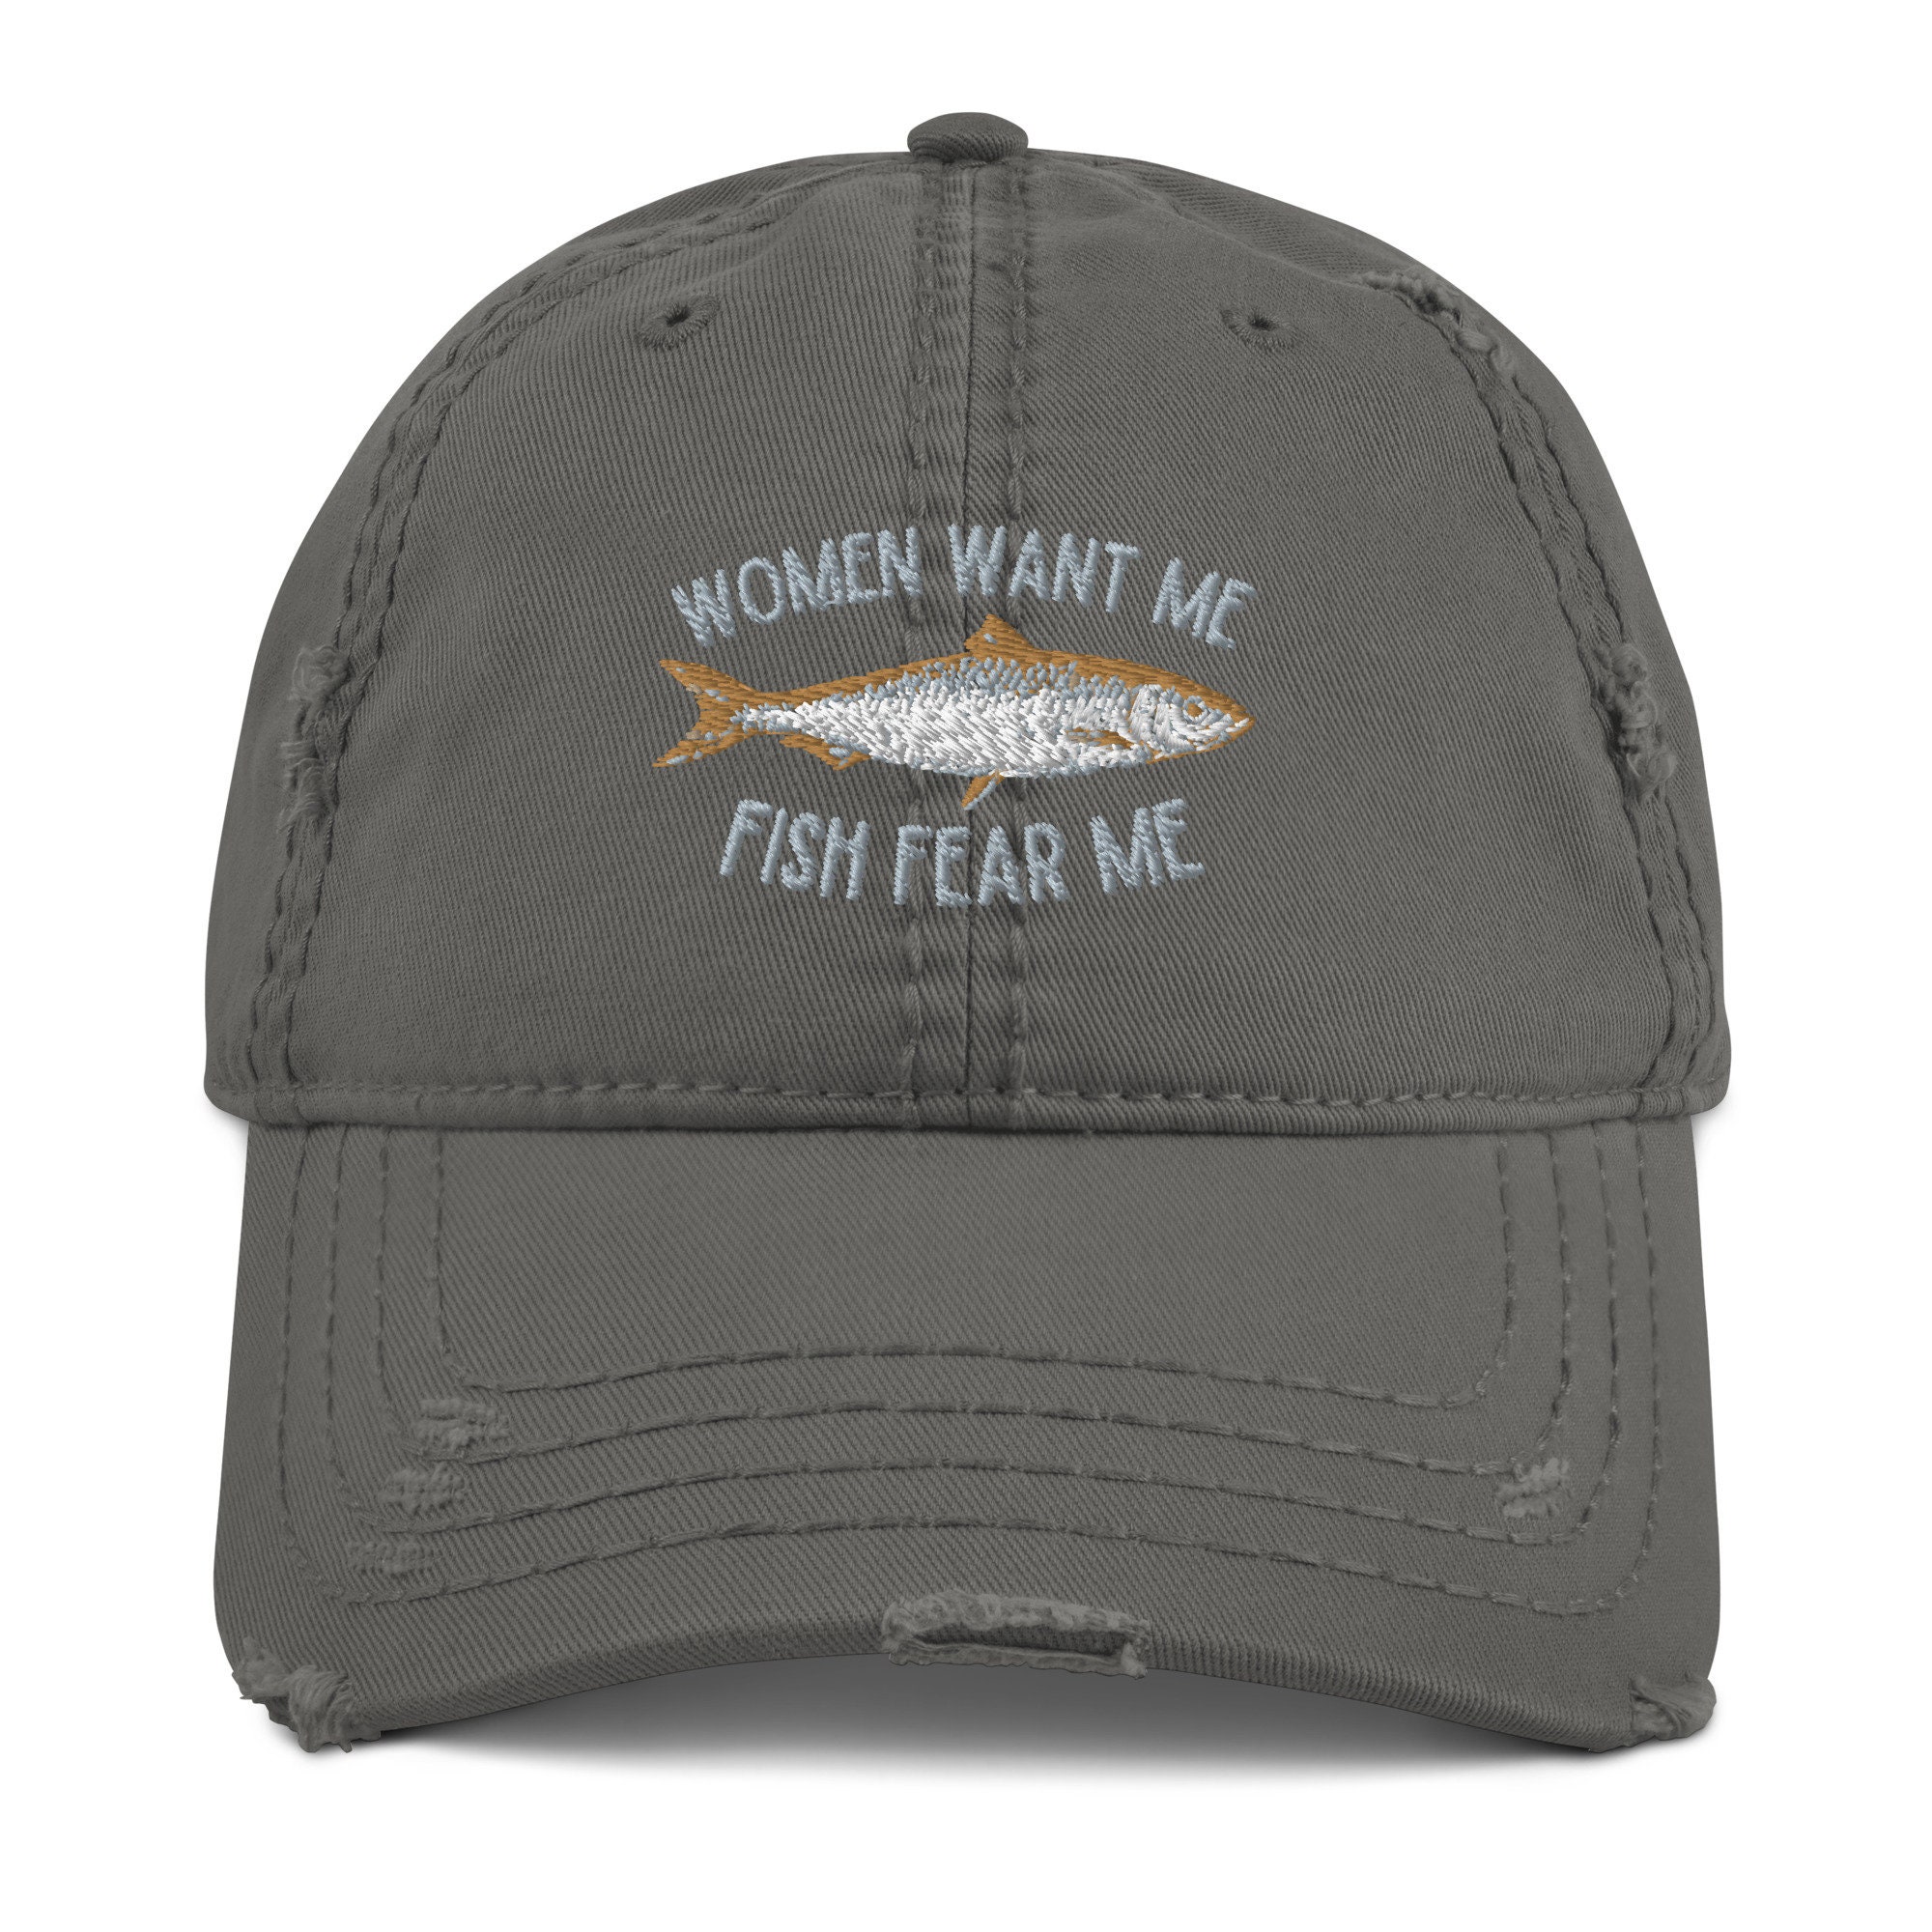 Women Fear Me - Fish Want Me - Embroidered Bucket Hat